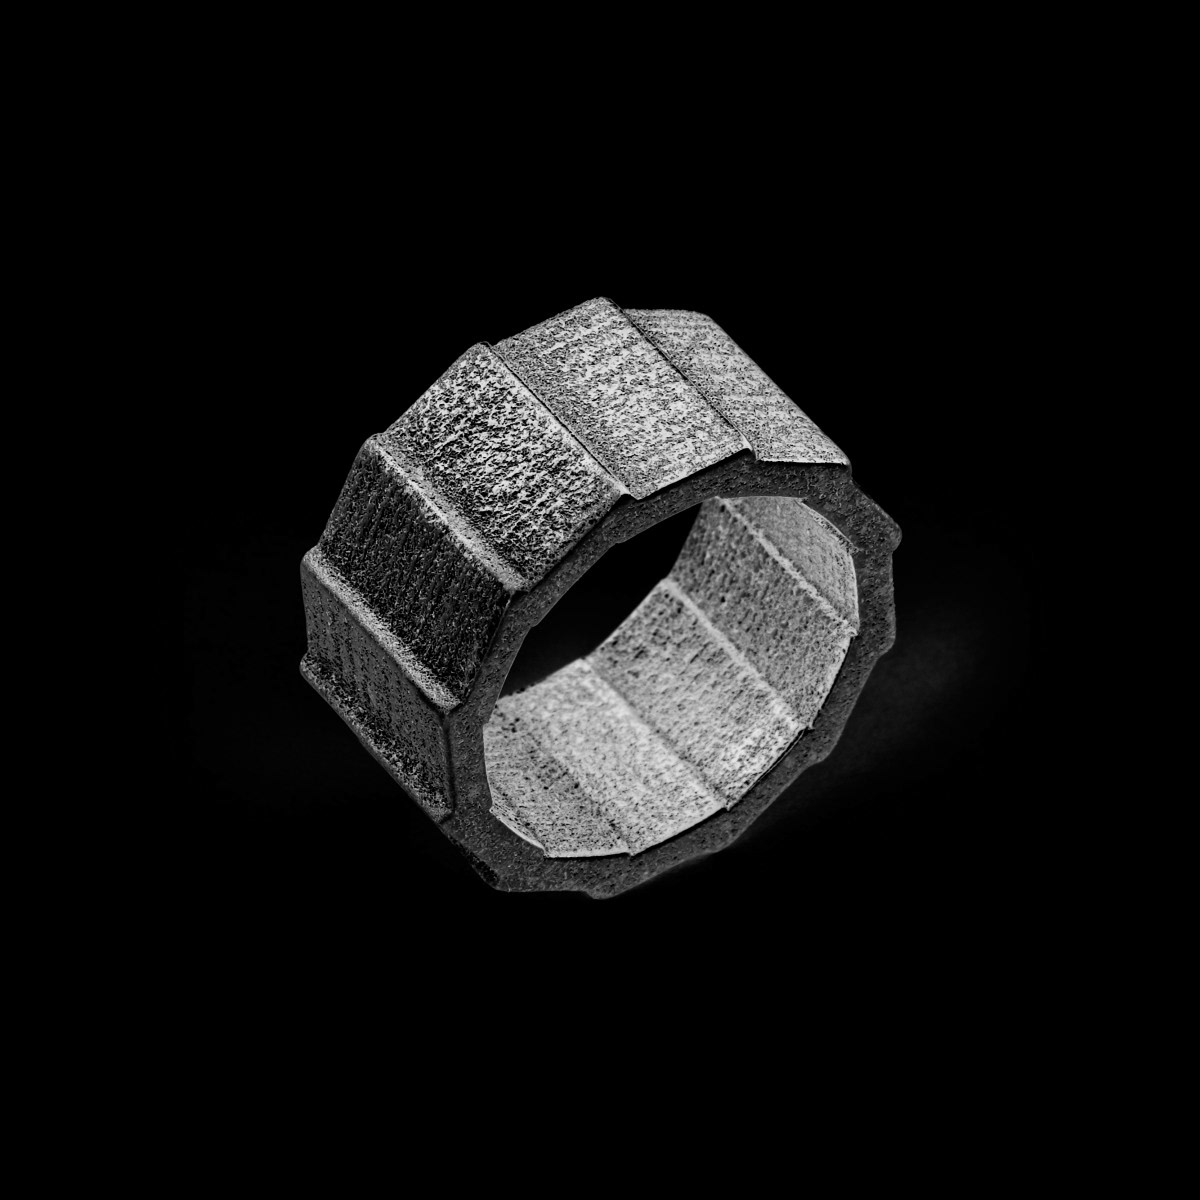 abcdrings rings jewelry Fashion  accessories trend Style geometry space code printed ukraine